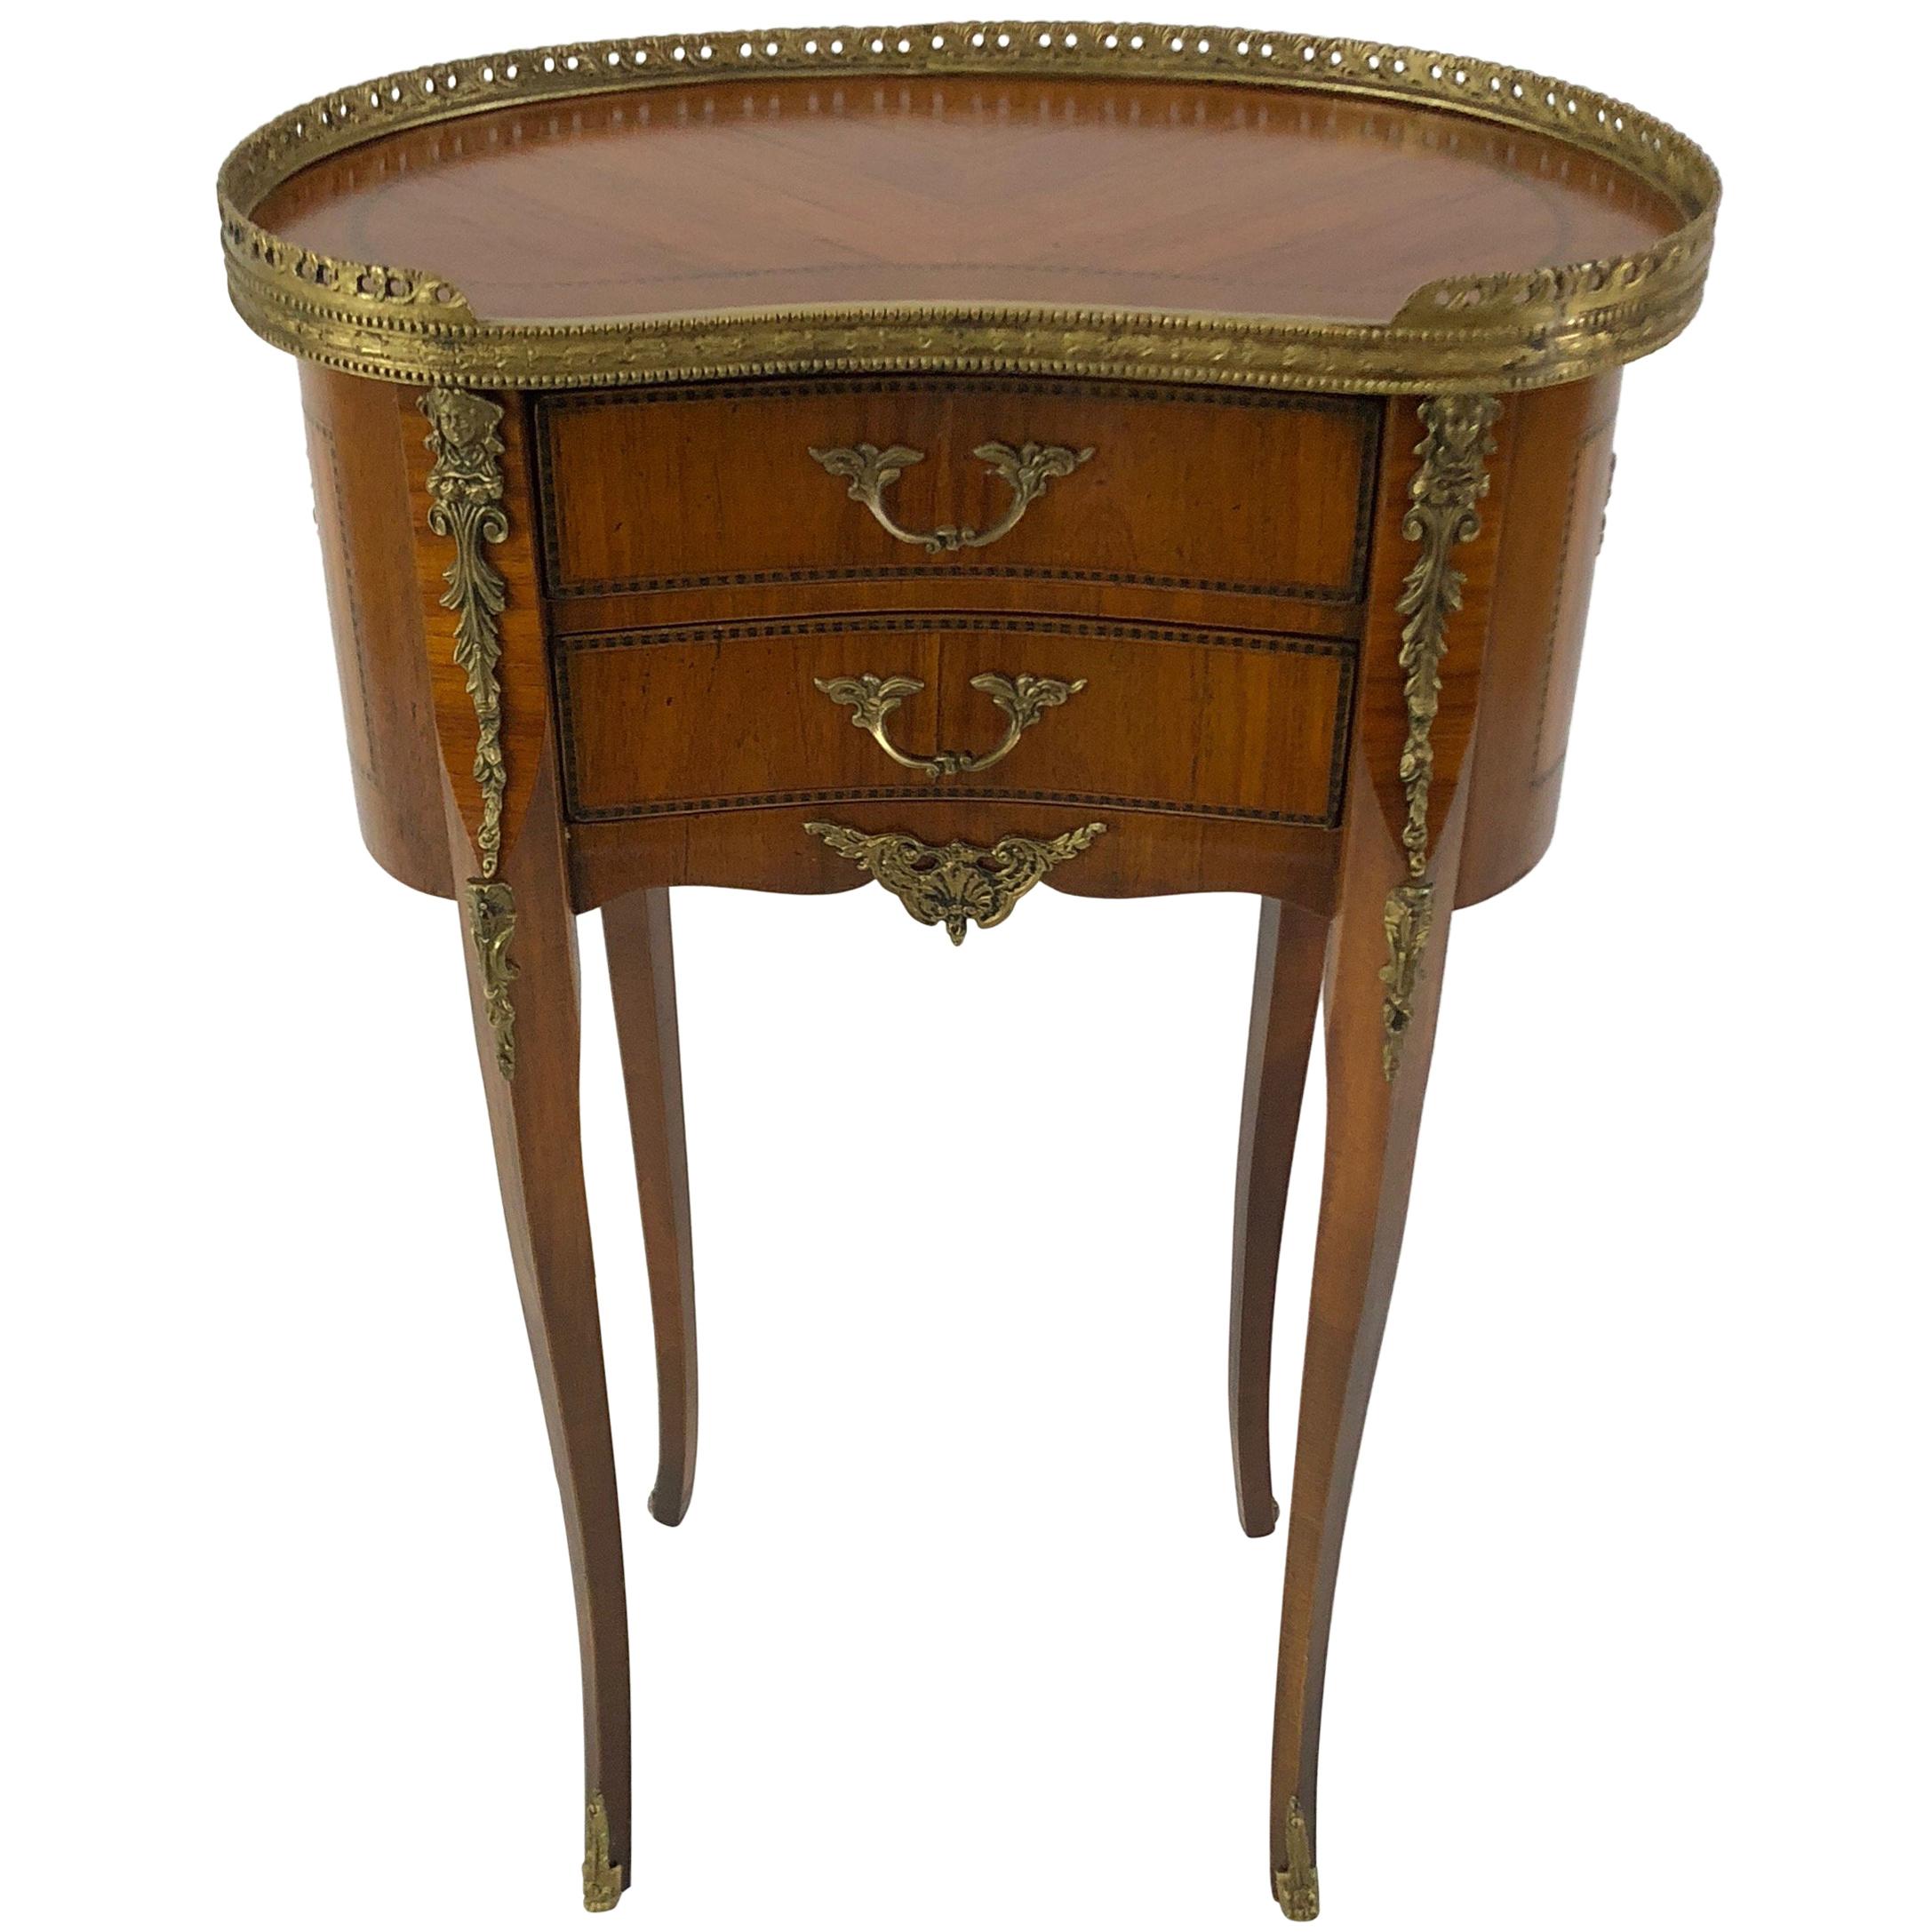 Exquisite Italian Kidney Shaped Inlay Mahogany Nightstand or End Table